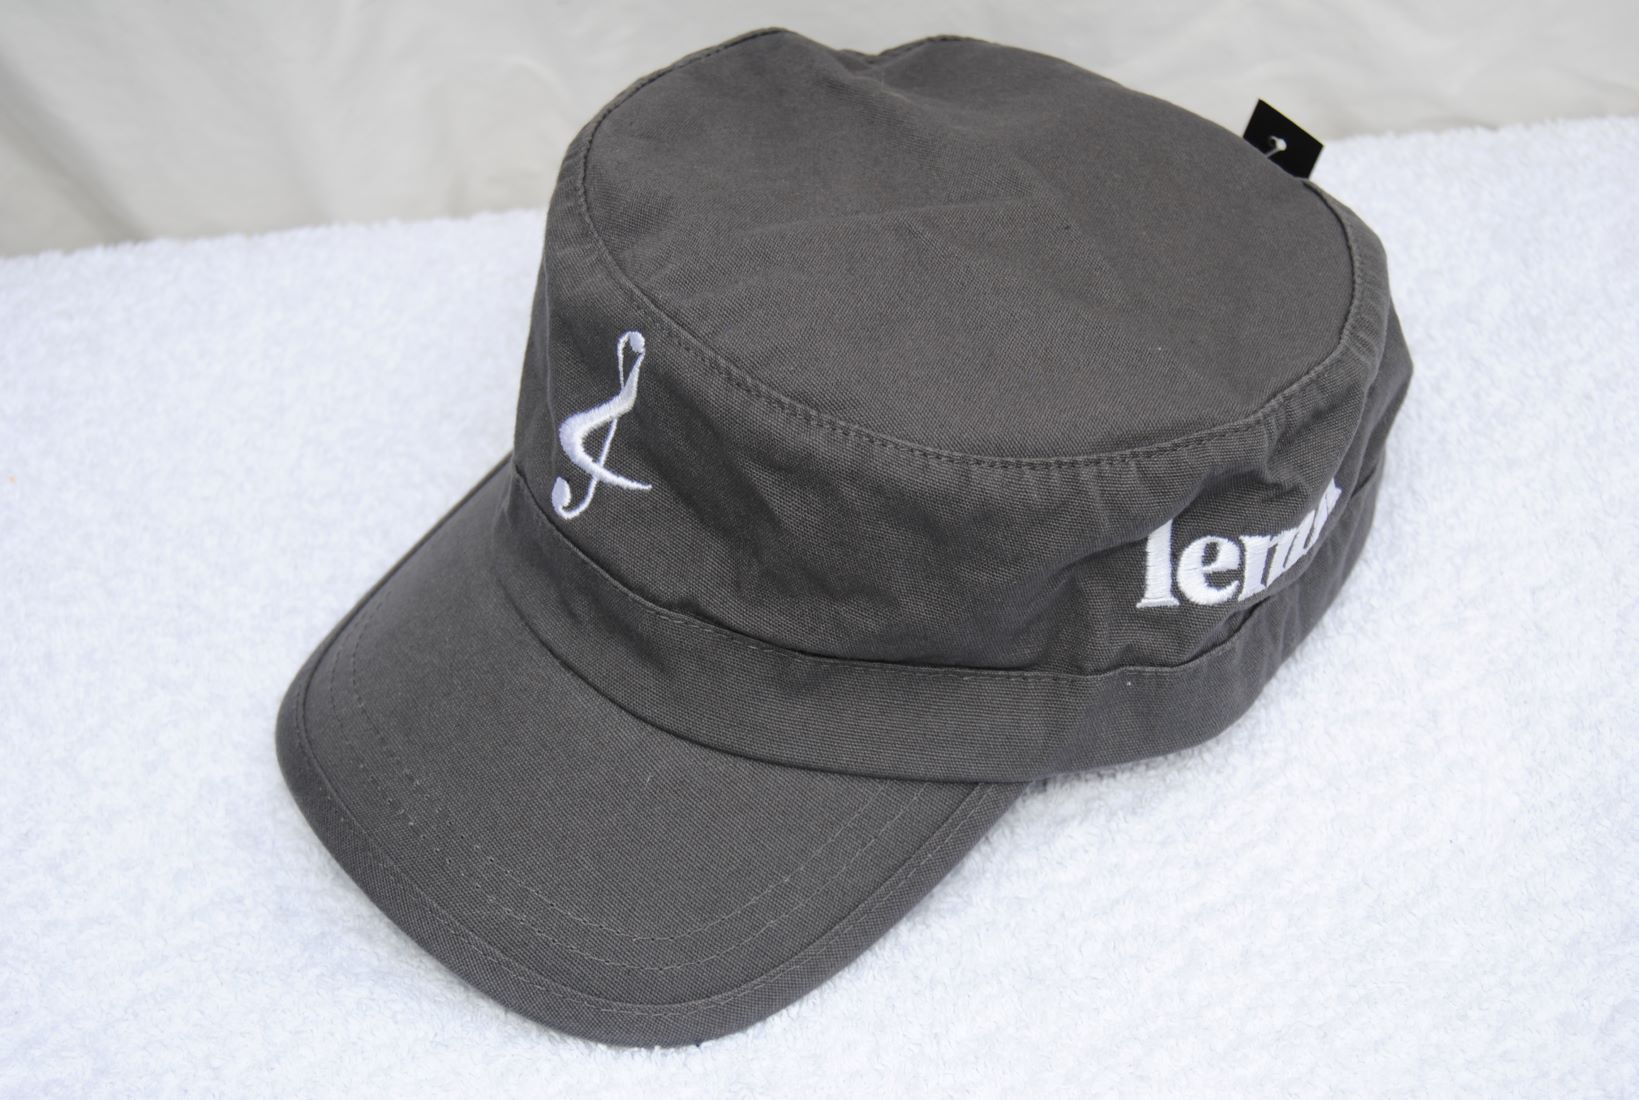 Unisex Adjustable Cotton Army Cap- Black or Grey &amp; Limited Edition Gold Label